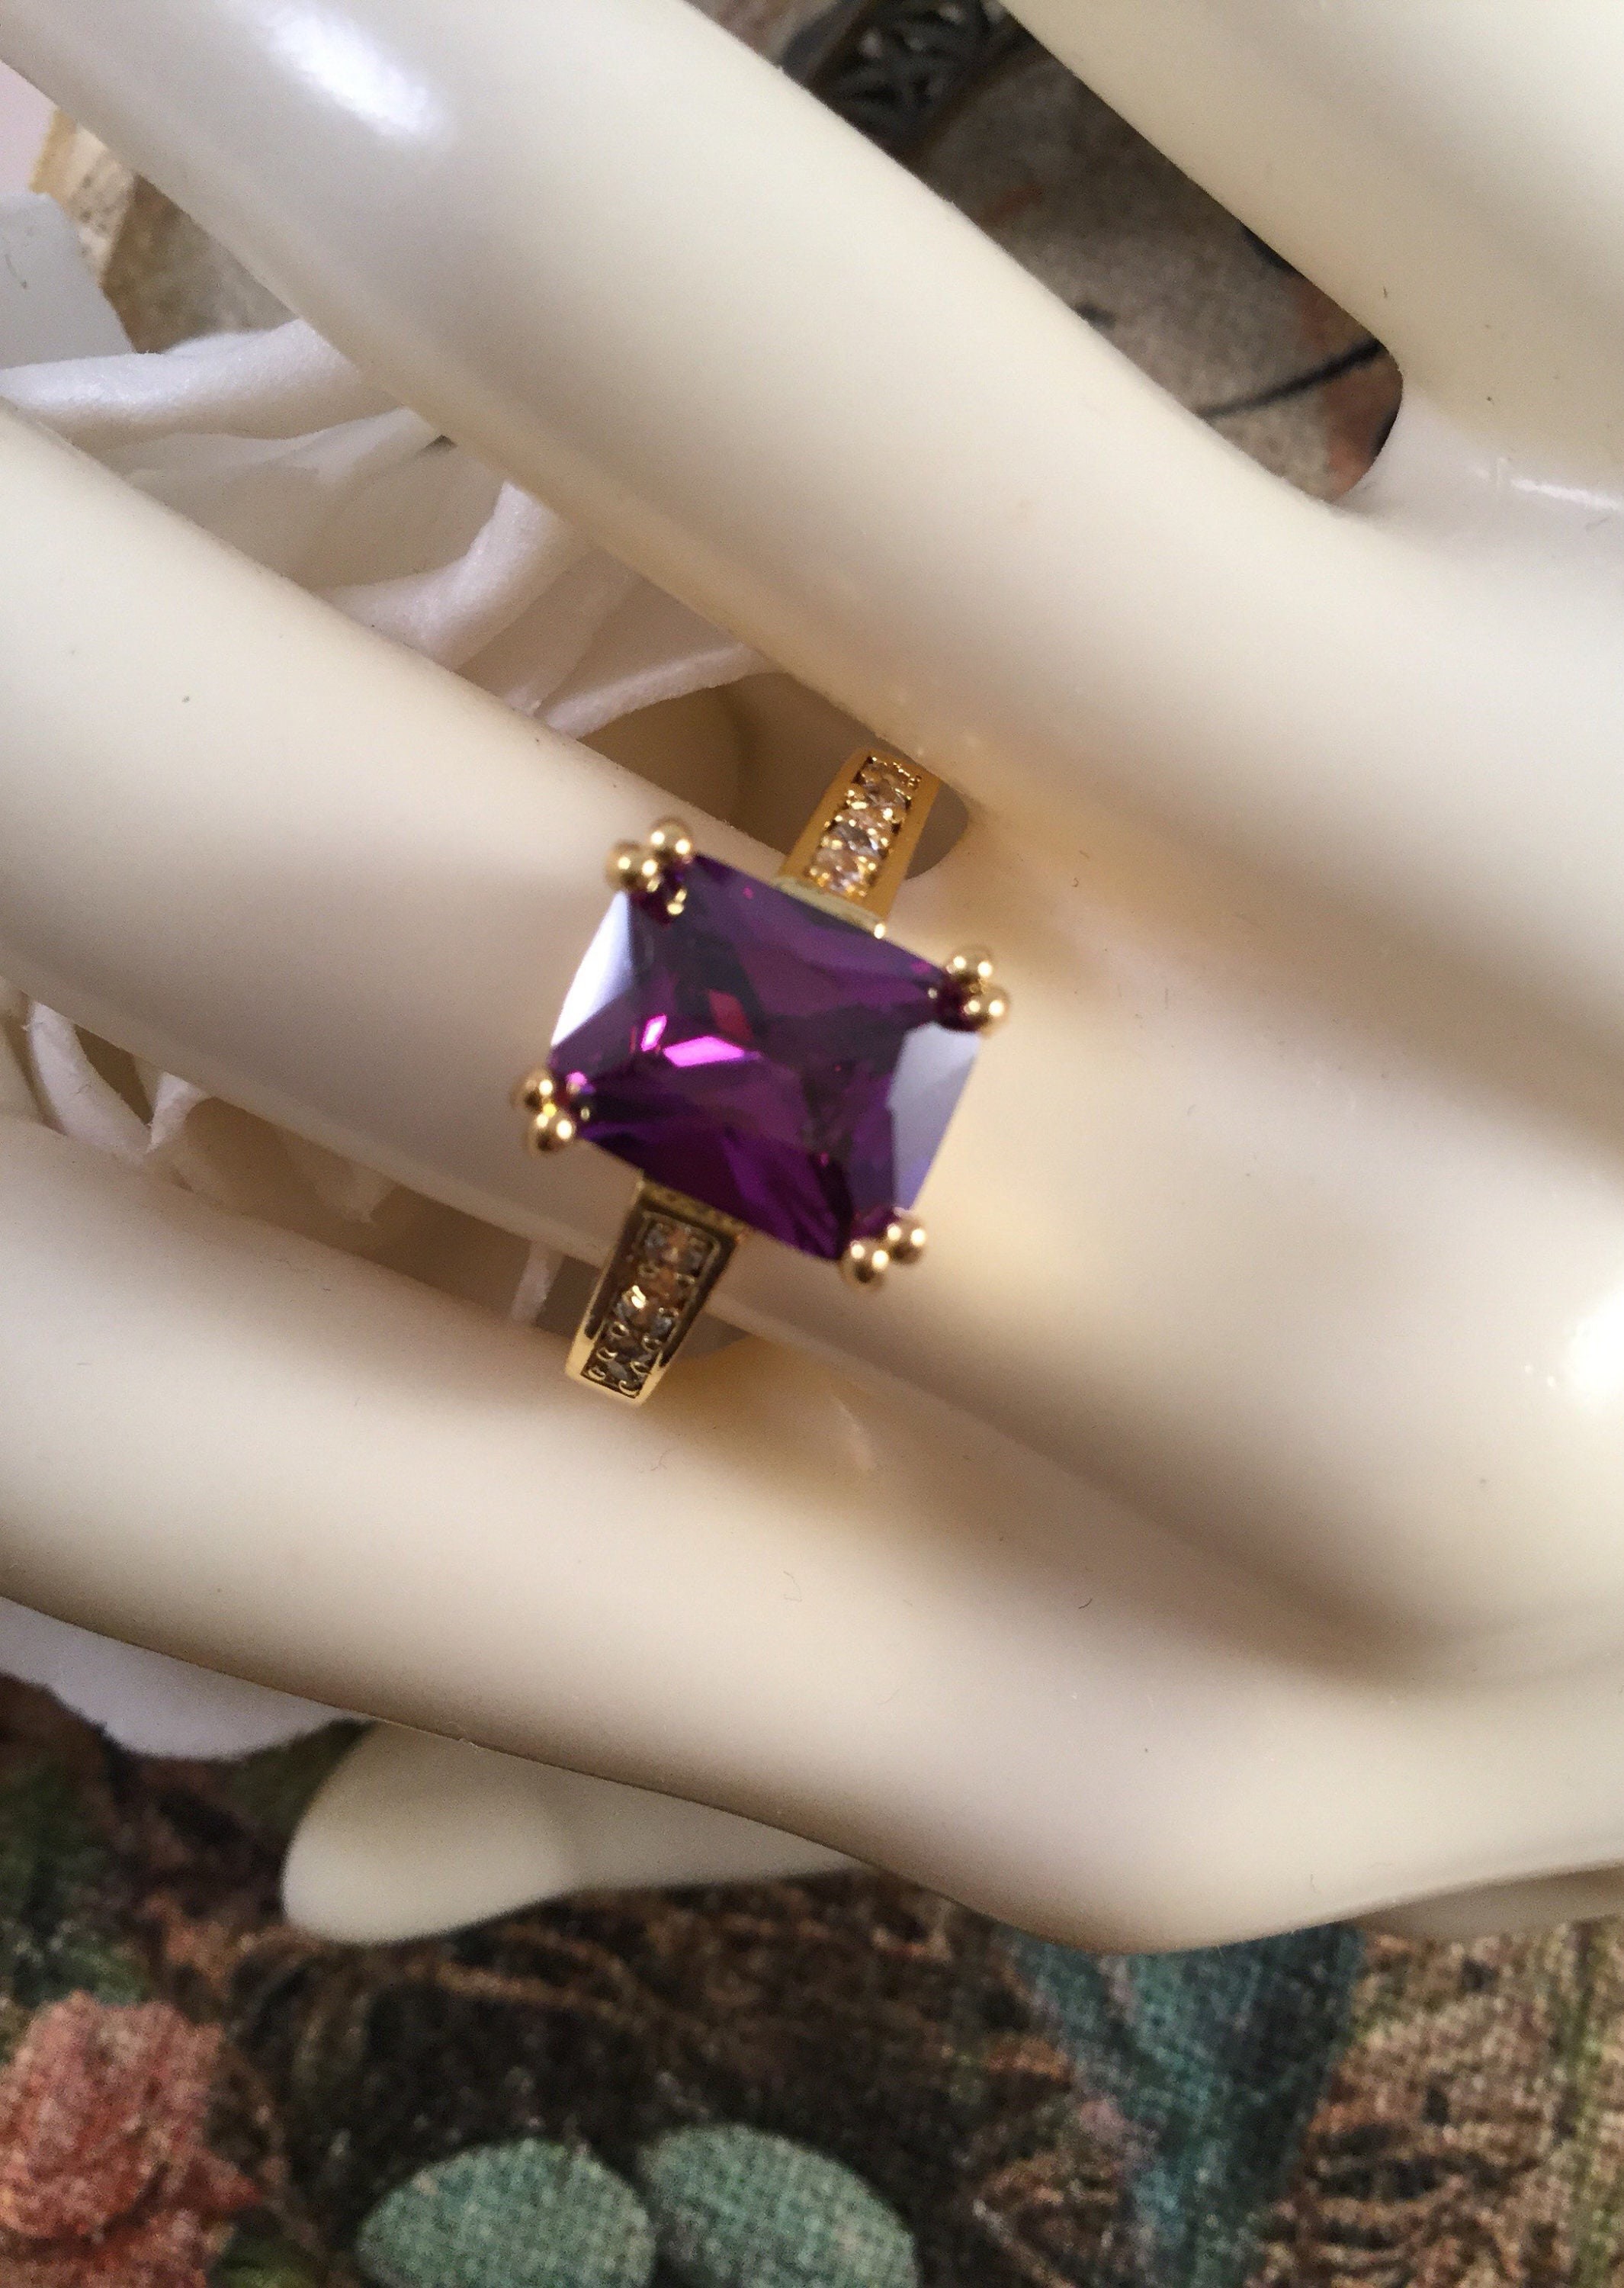 Vintage Jewellery Yellow Gold Ring with Amethysts and White Sapphires Antique Art Deco Dress Jewelry medium Ring Size 8 or Q